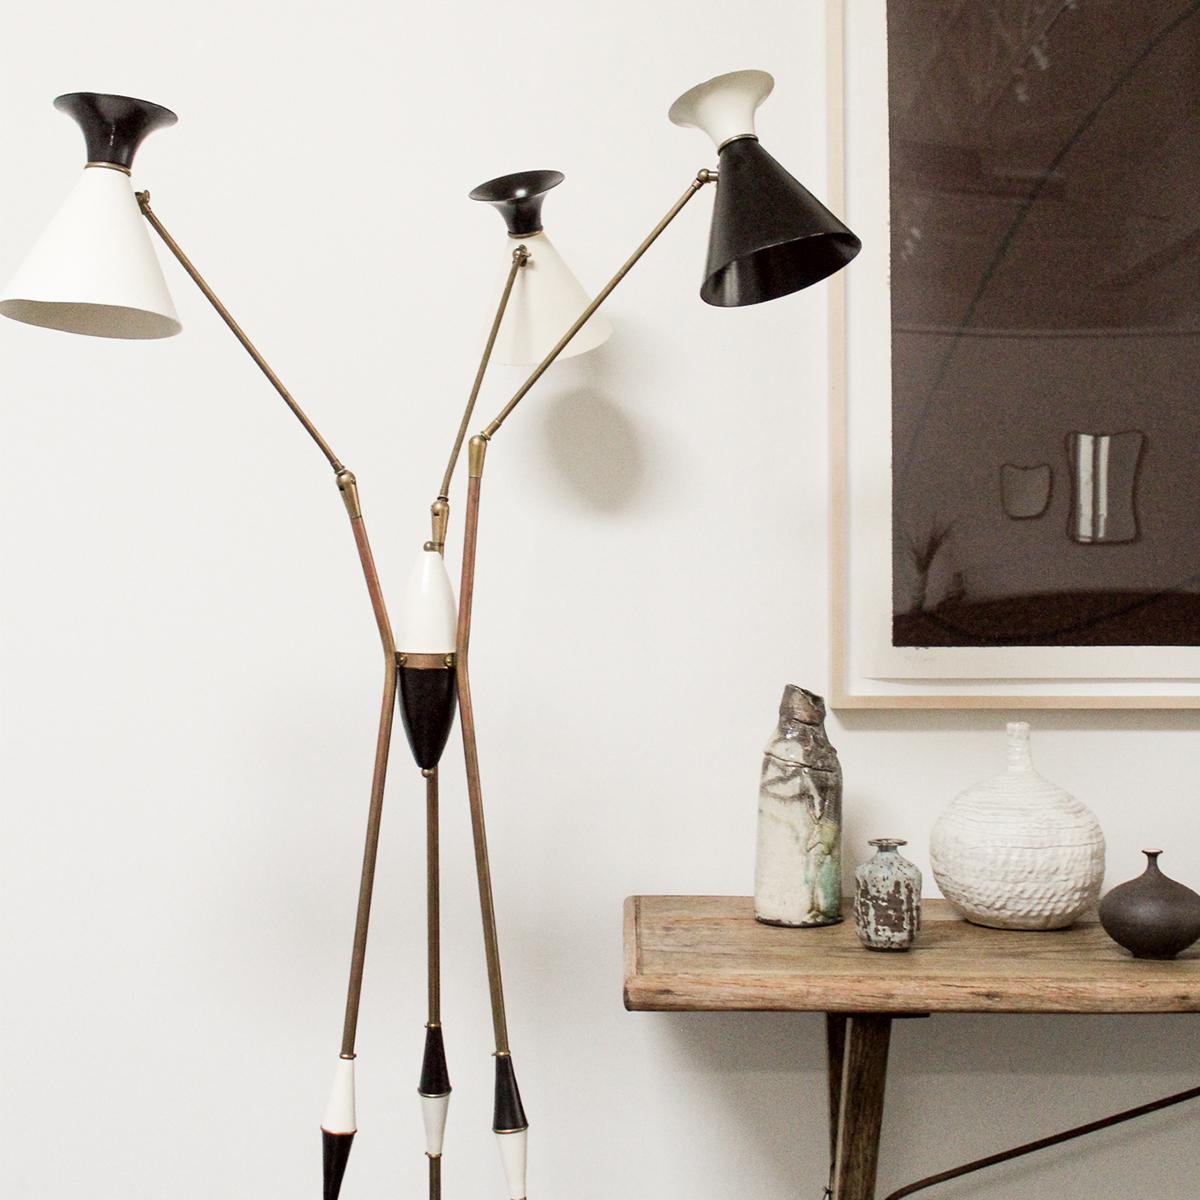 A rare Stilnovo black and off-white three light tripod floor lamp with moveable arms from the 1960’s. The fixture features three enamel shades has been rewired and restored by the Selby House. Each arm and lampshade is fully adjustable allowing the